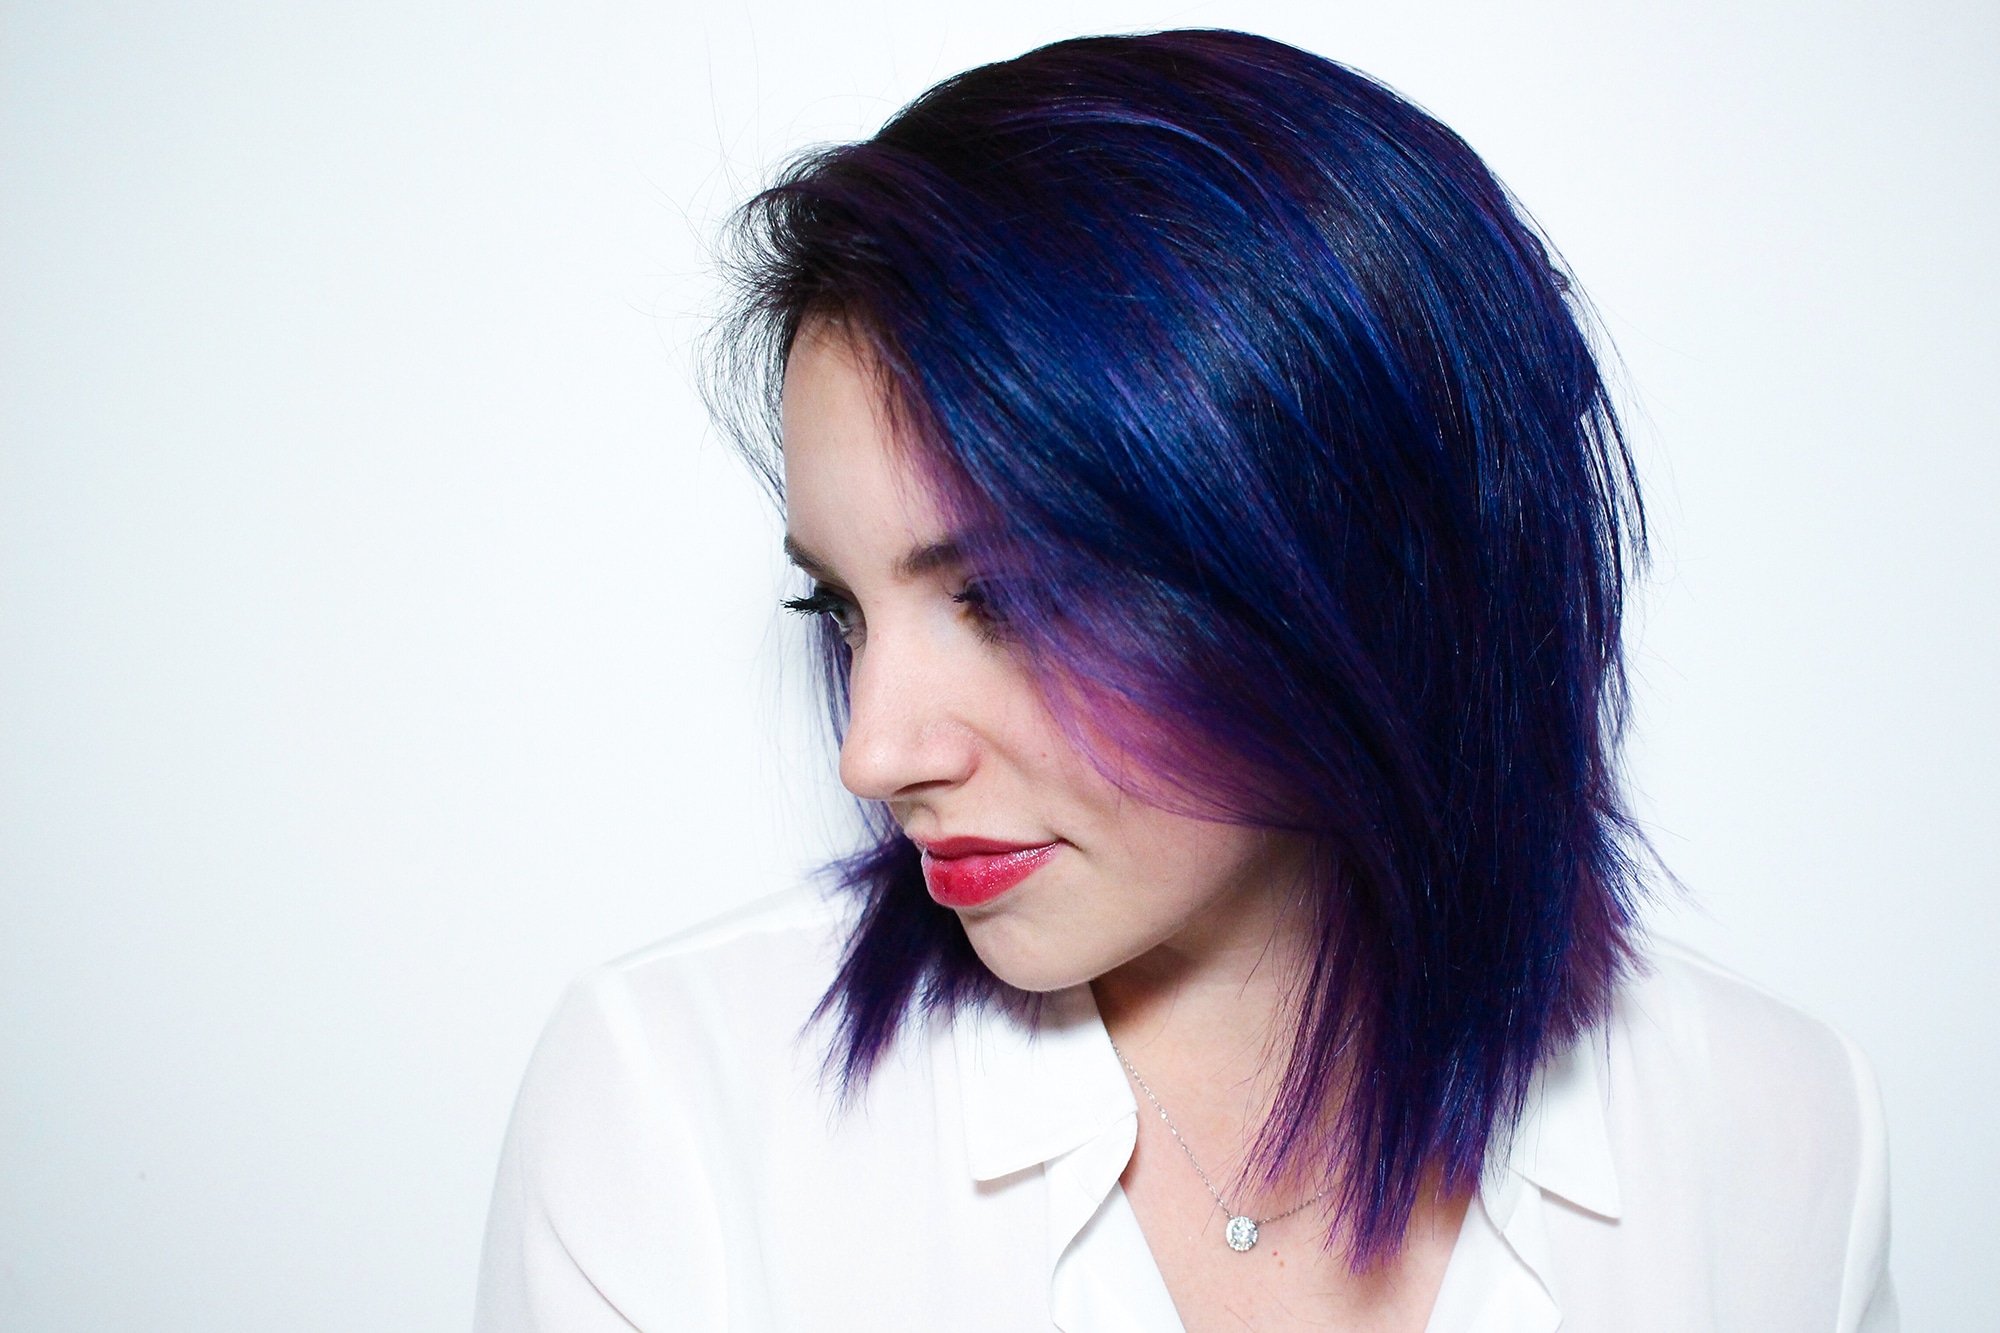 6. How to Dye Your Hair Blue Without Bleach - wide 1